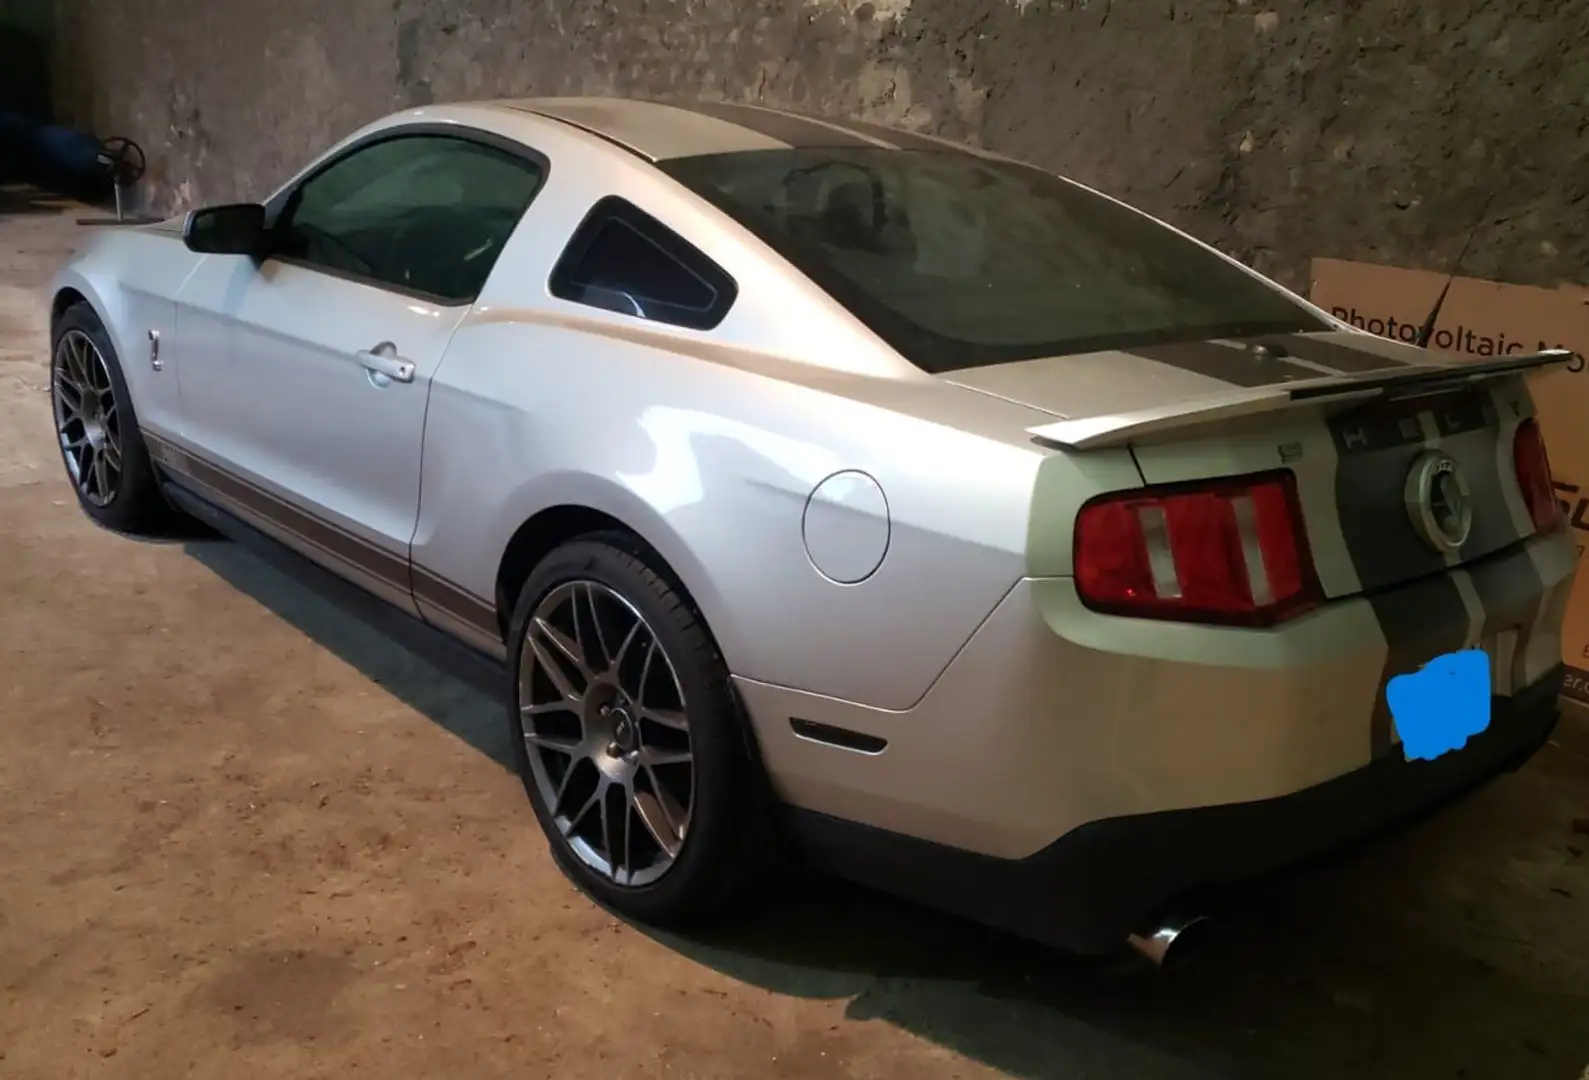 Ford Mustang GT 500 Shelby 2012 v8 5.4L Argent - 2